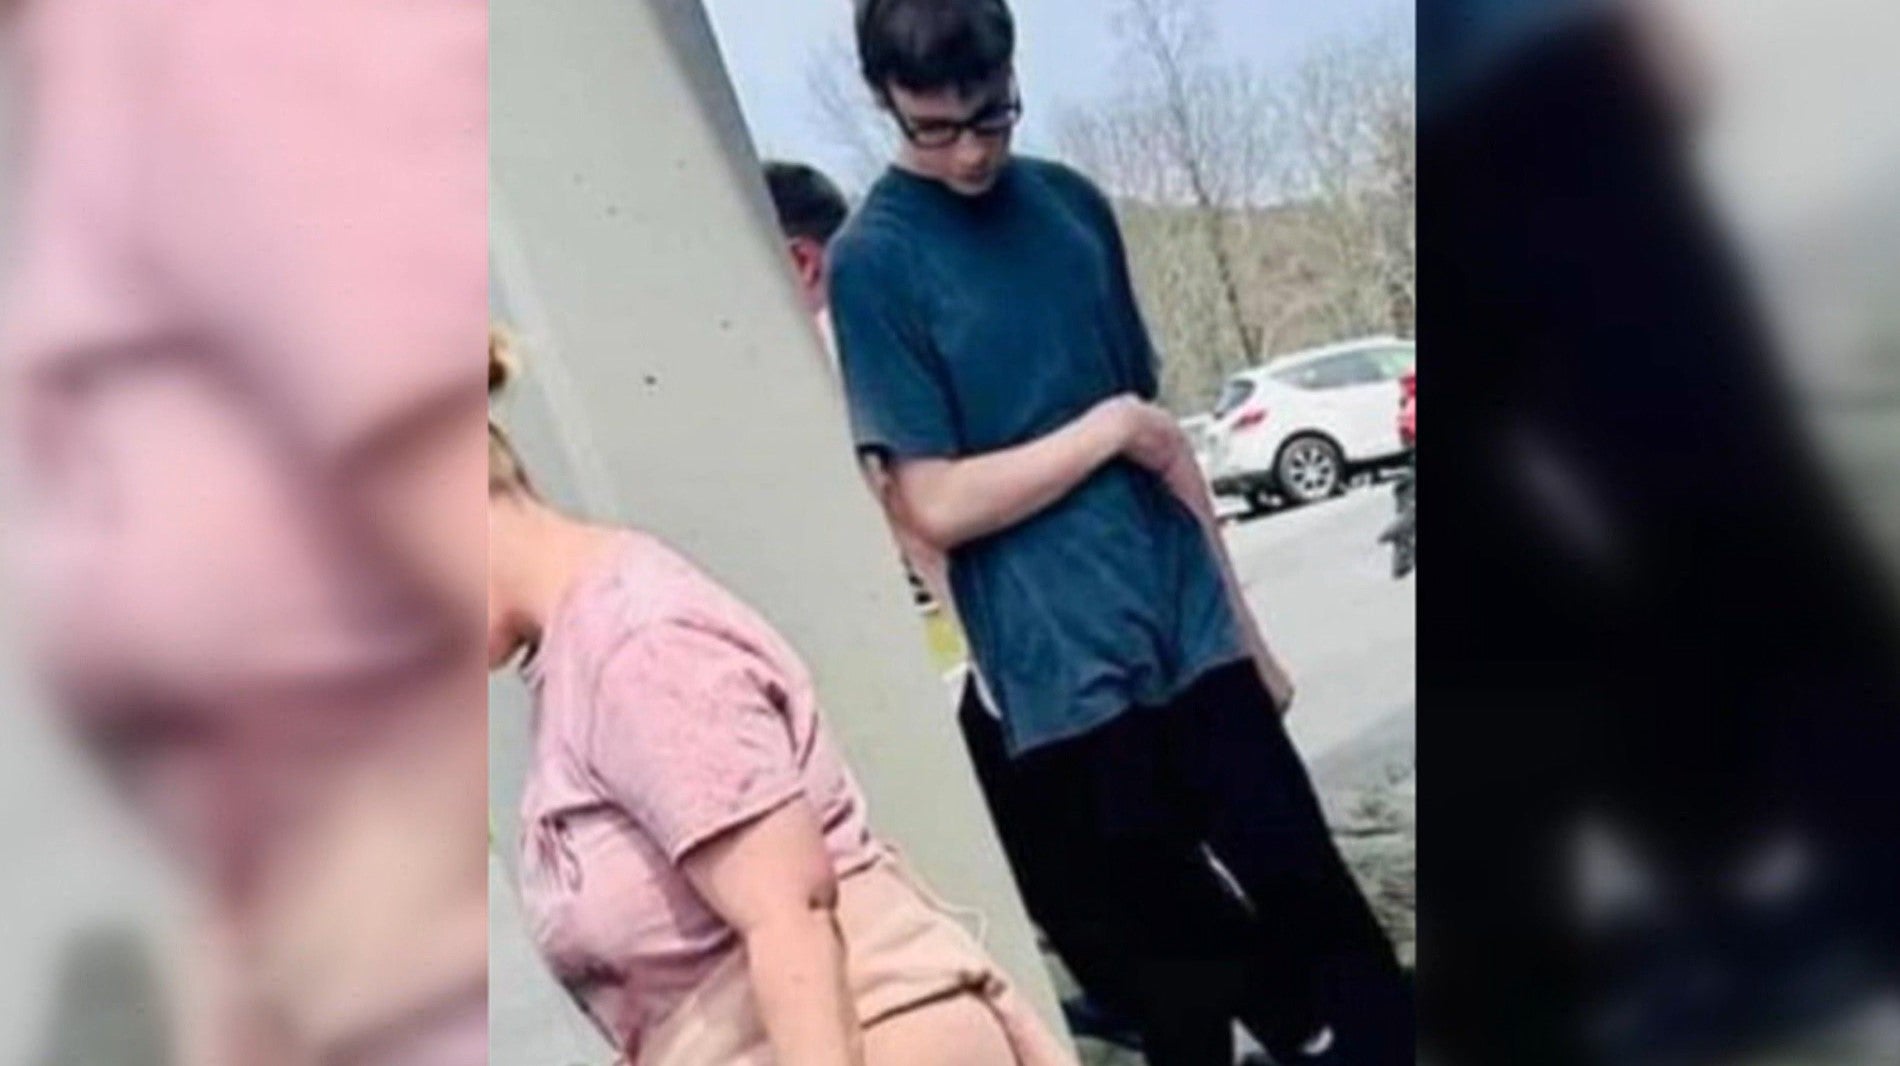 This photo was shared widely online, with the belief Tennessee teen Sebastian Rogers had been spotted in North Carolina